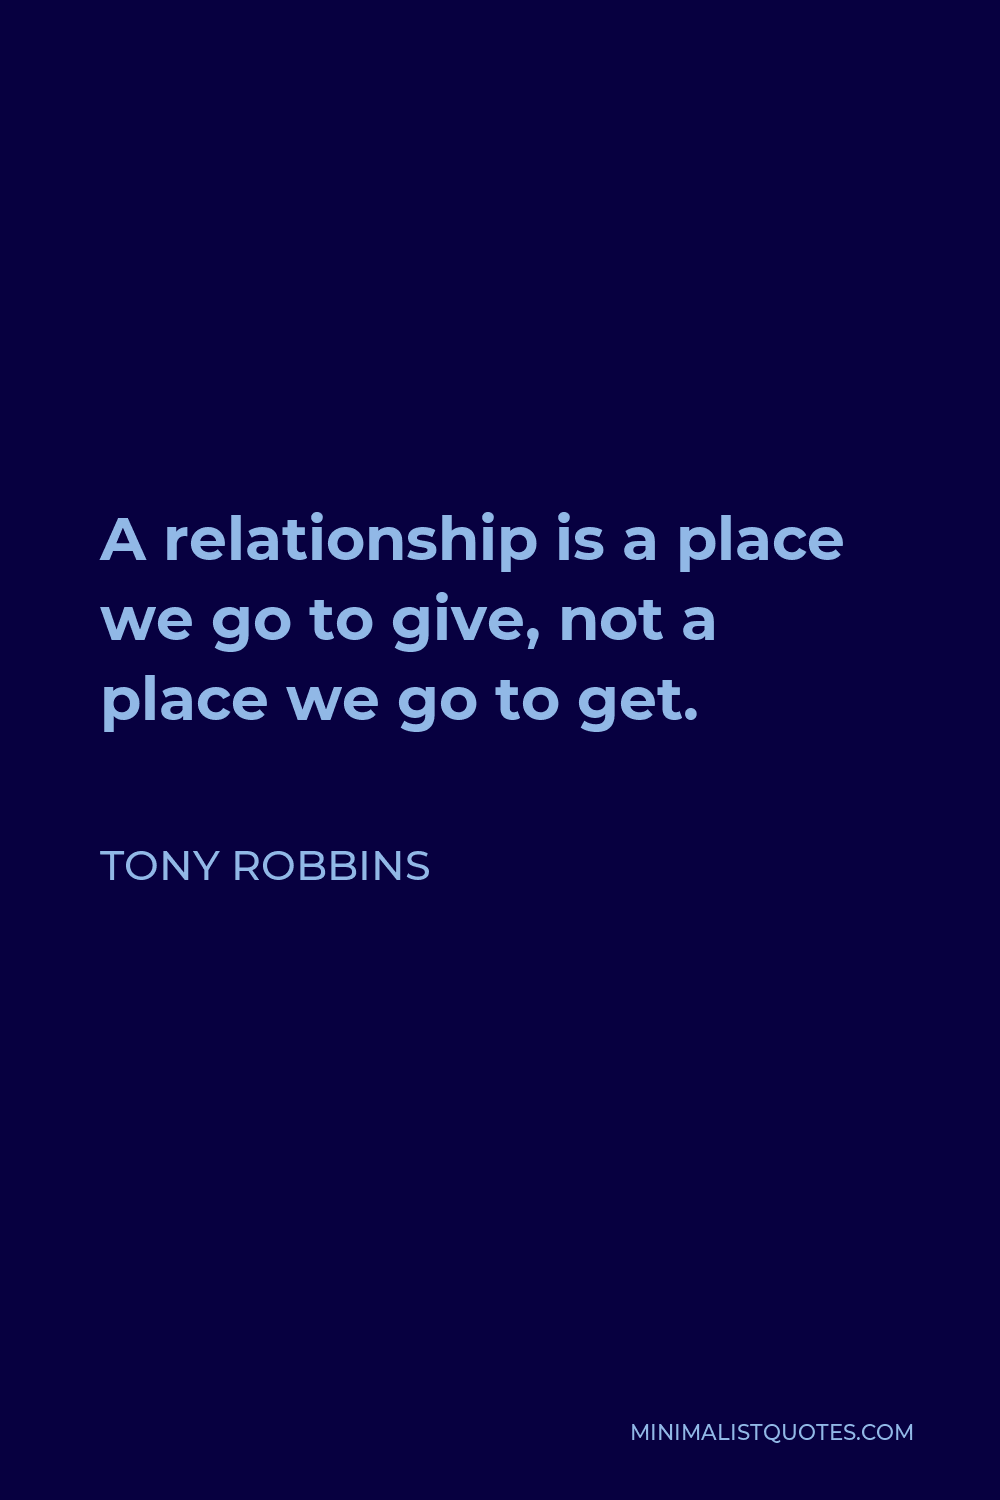 Tony Robbins Quote - A relationship is a place we go to give, not a place we go to get.